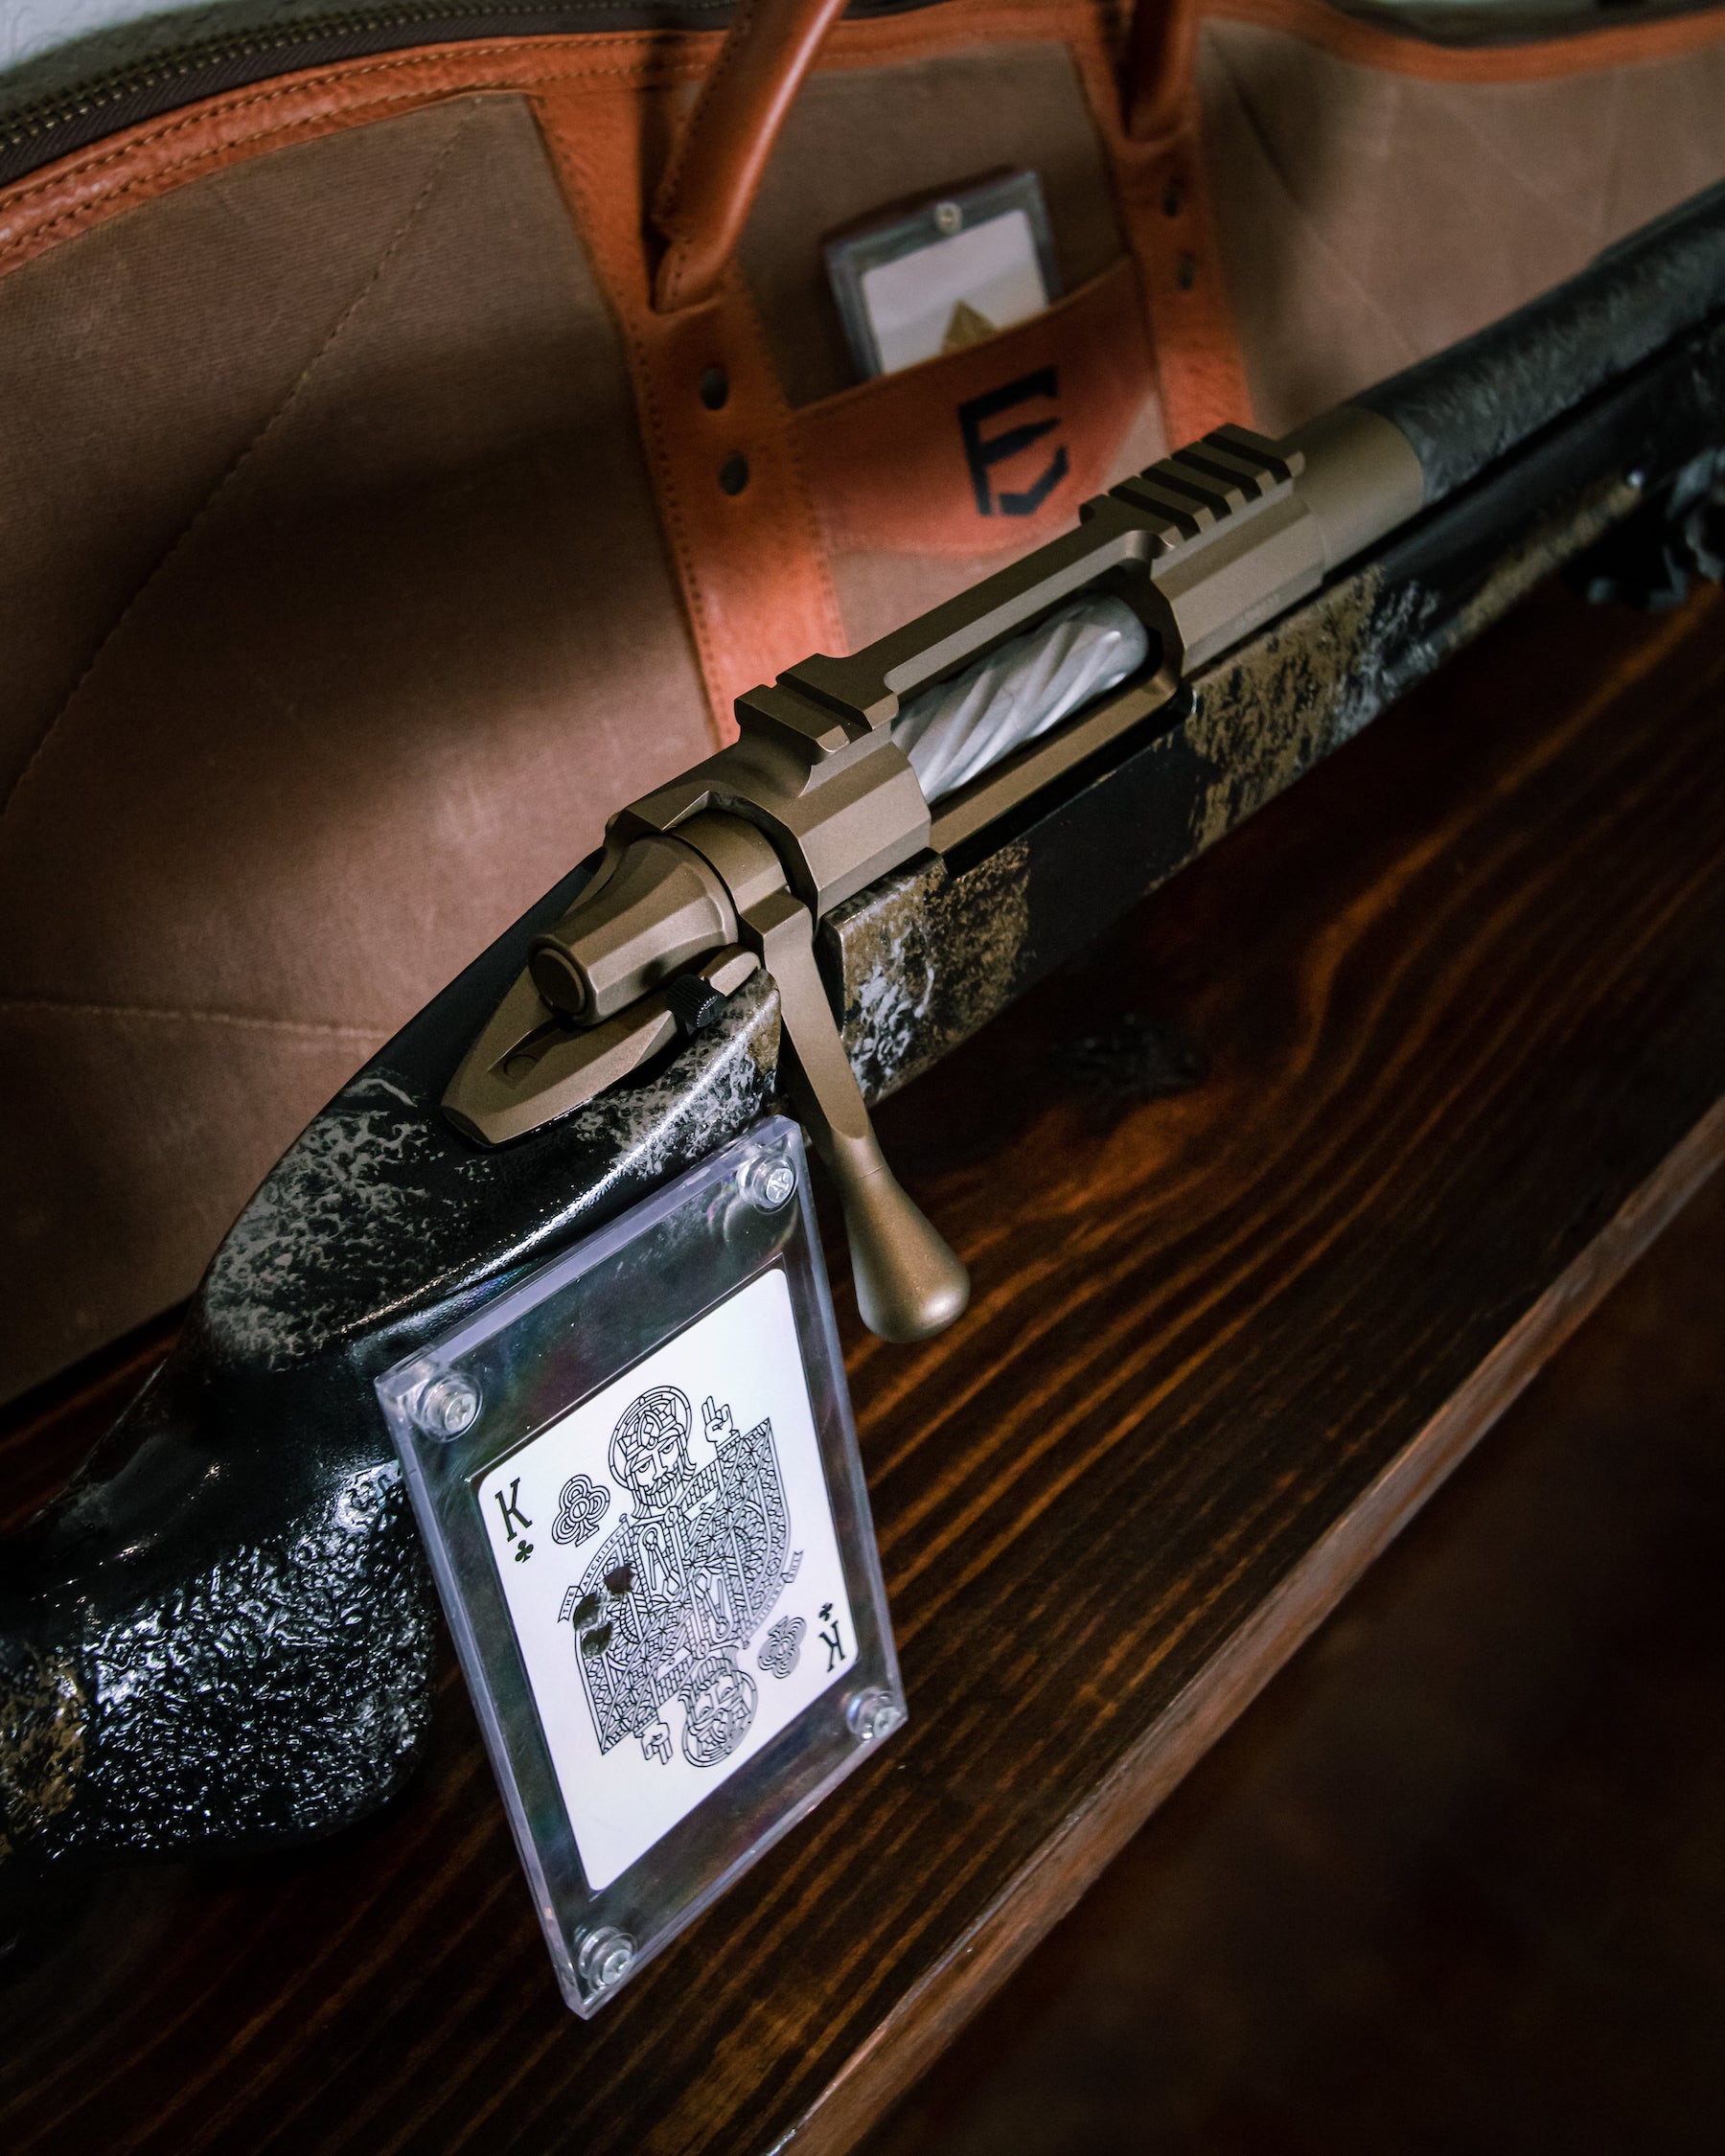 An Exile Firearms rifle on a wooden table